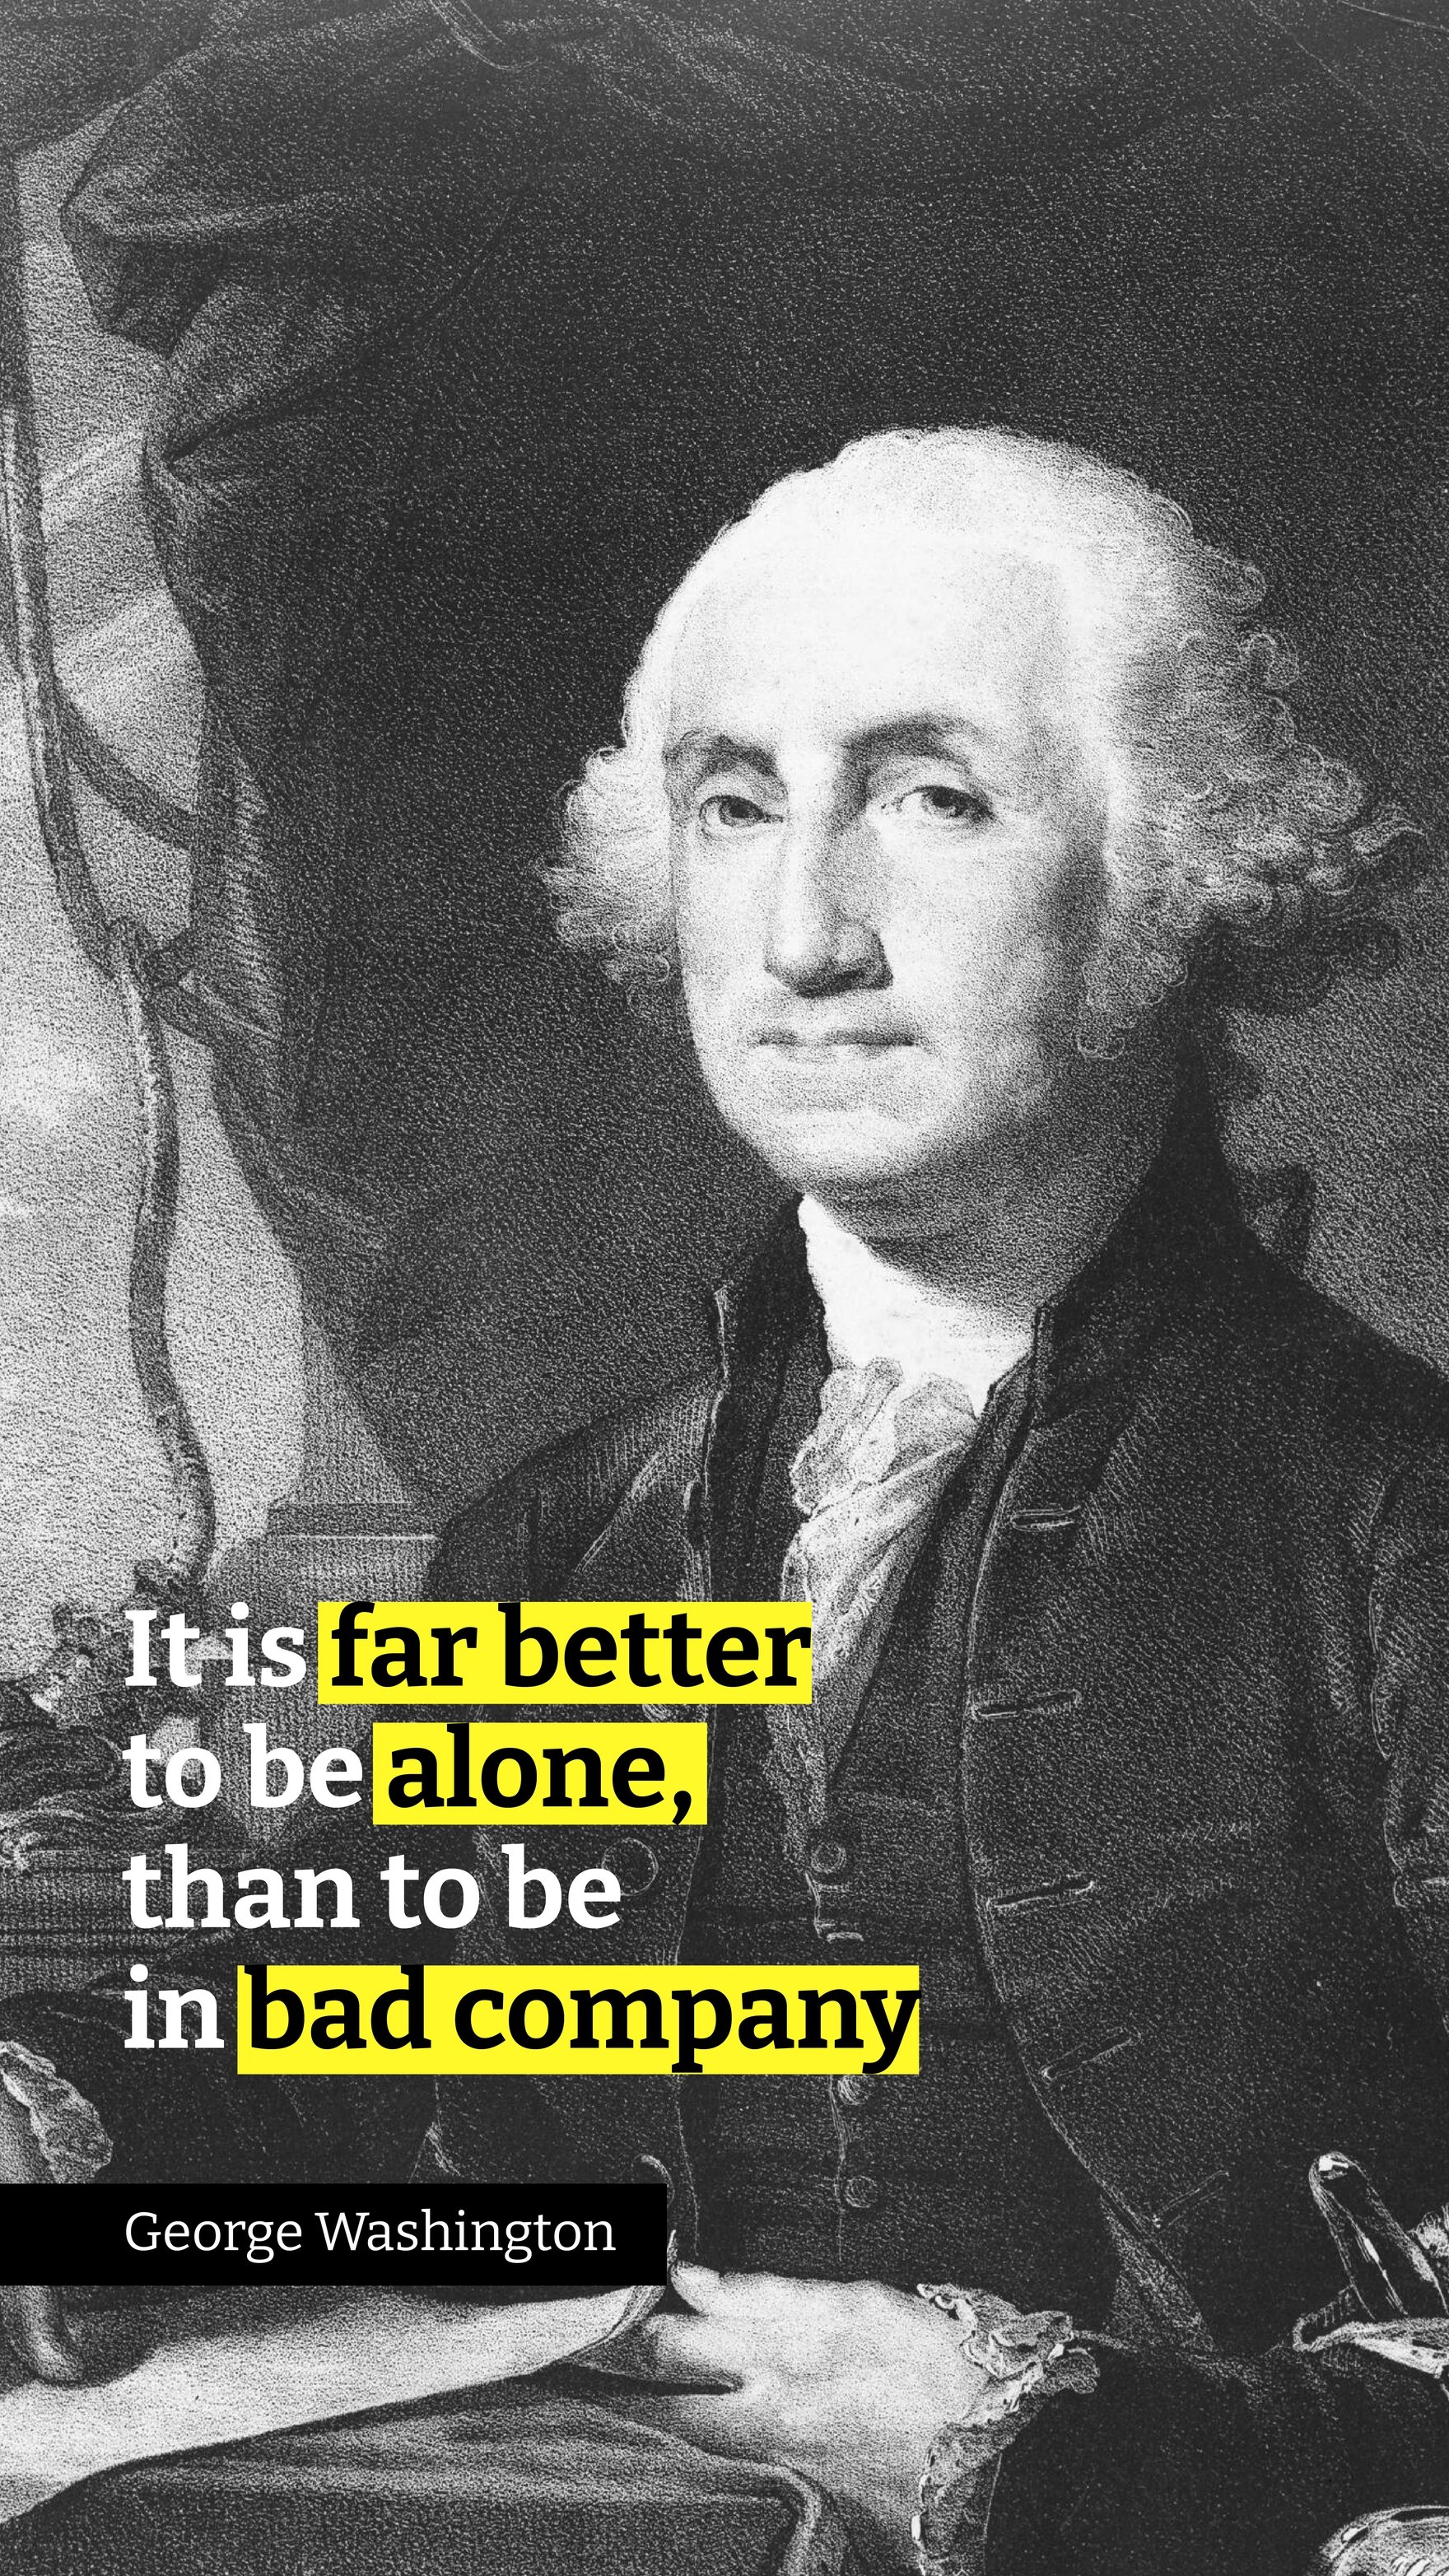 George Washington - It is far better to be alone, than to be in bad company